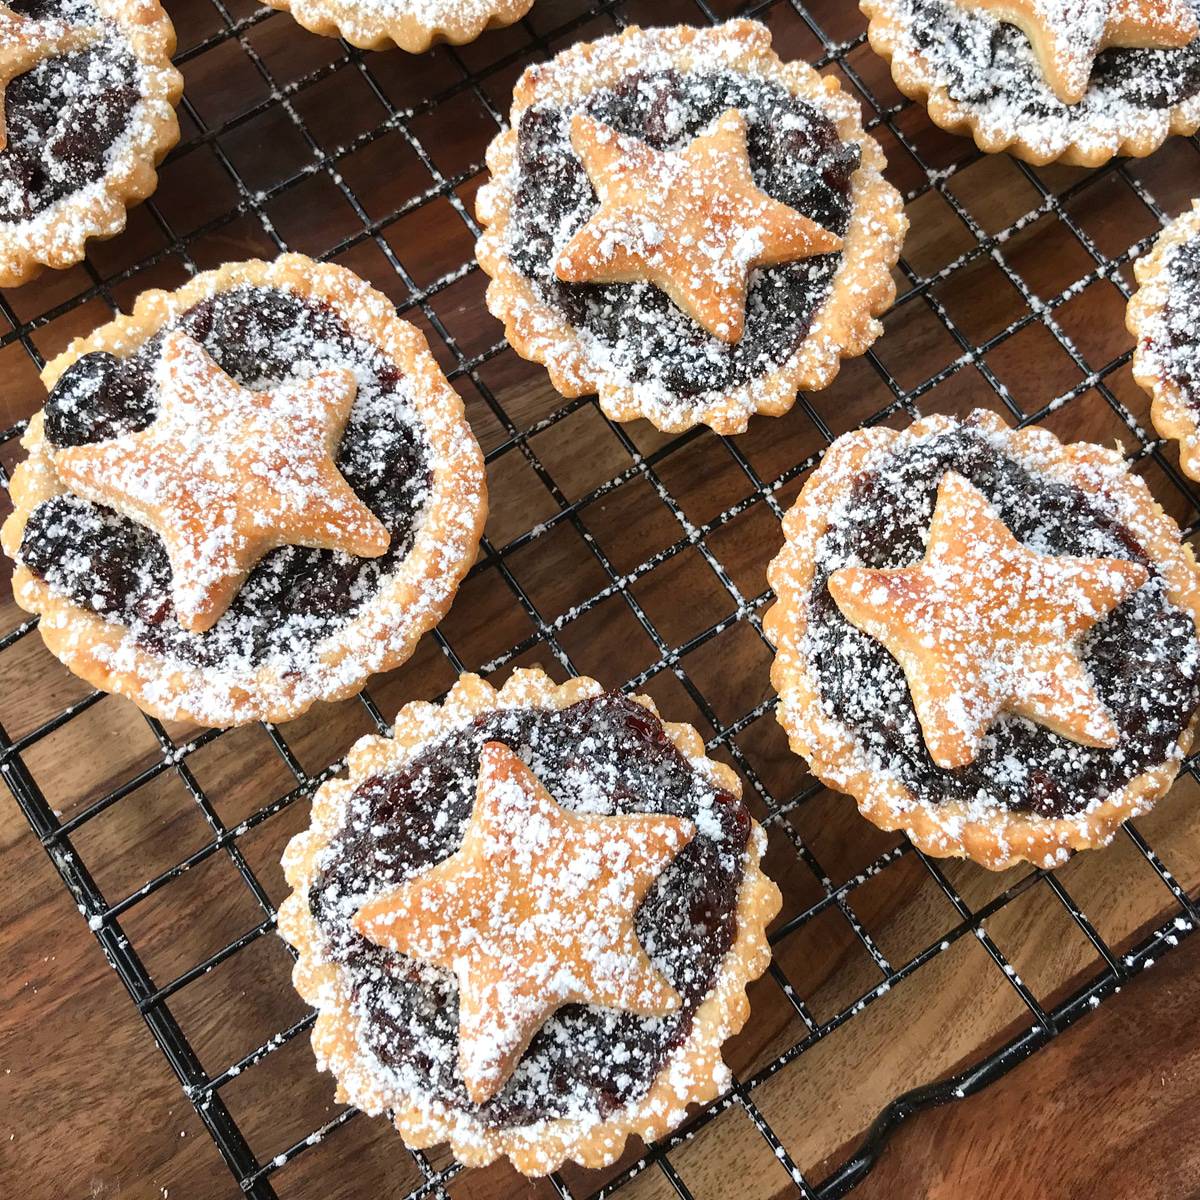 mincemeat pie recipe mince pie best traditional authentic British English from scratch